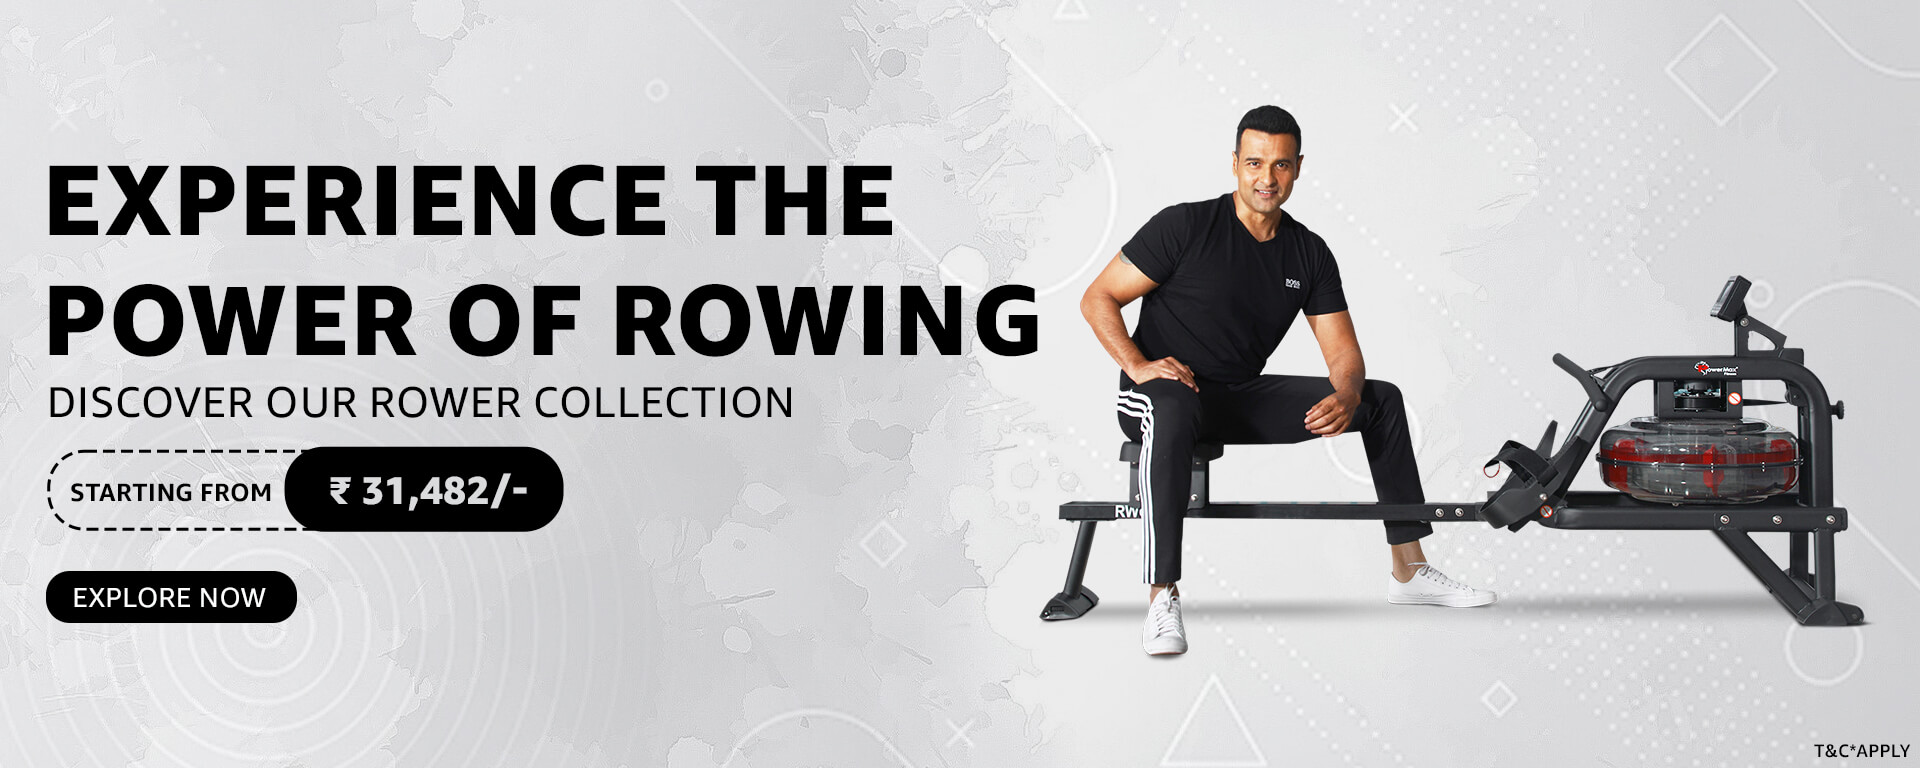 experience the power of rowing